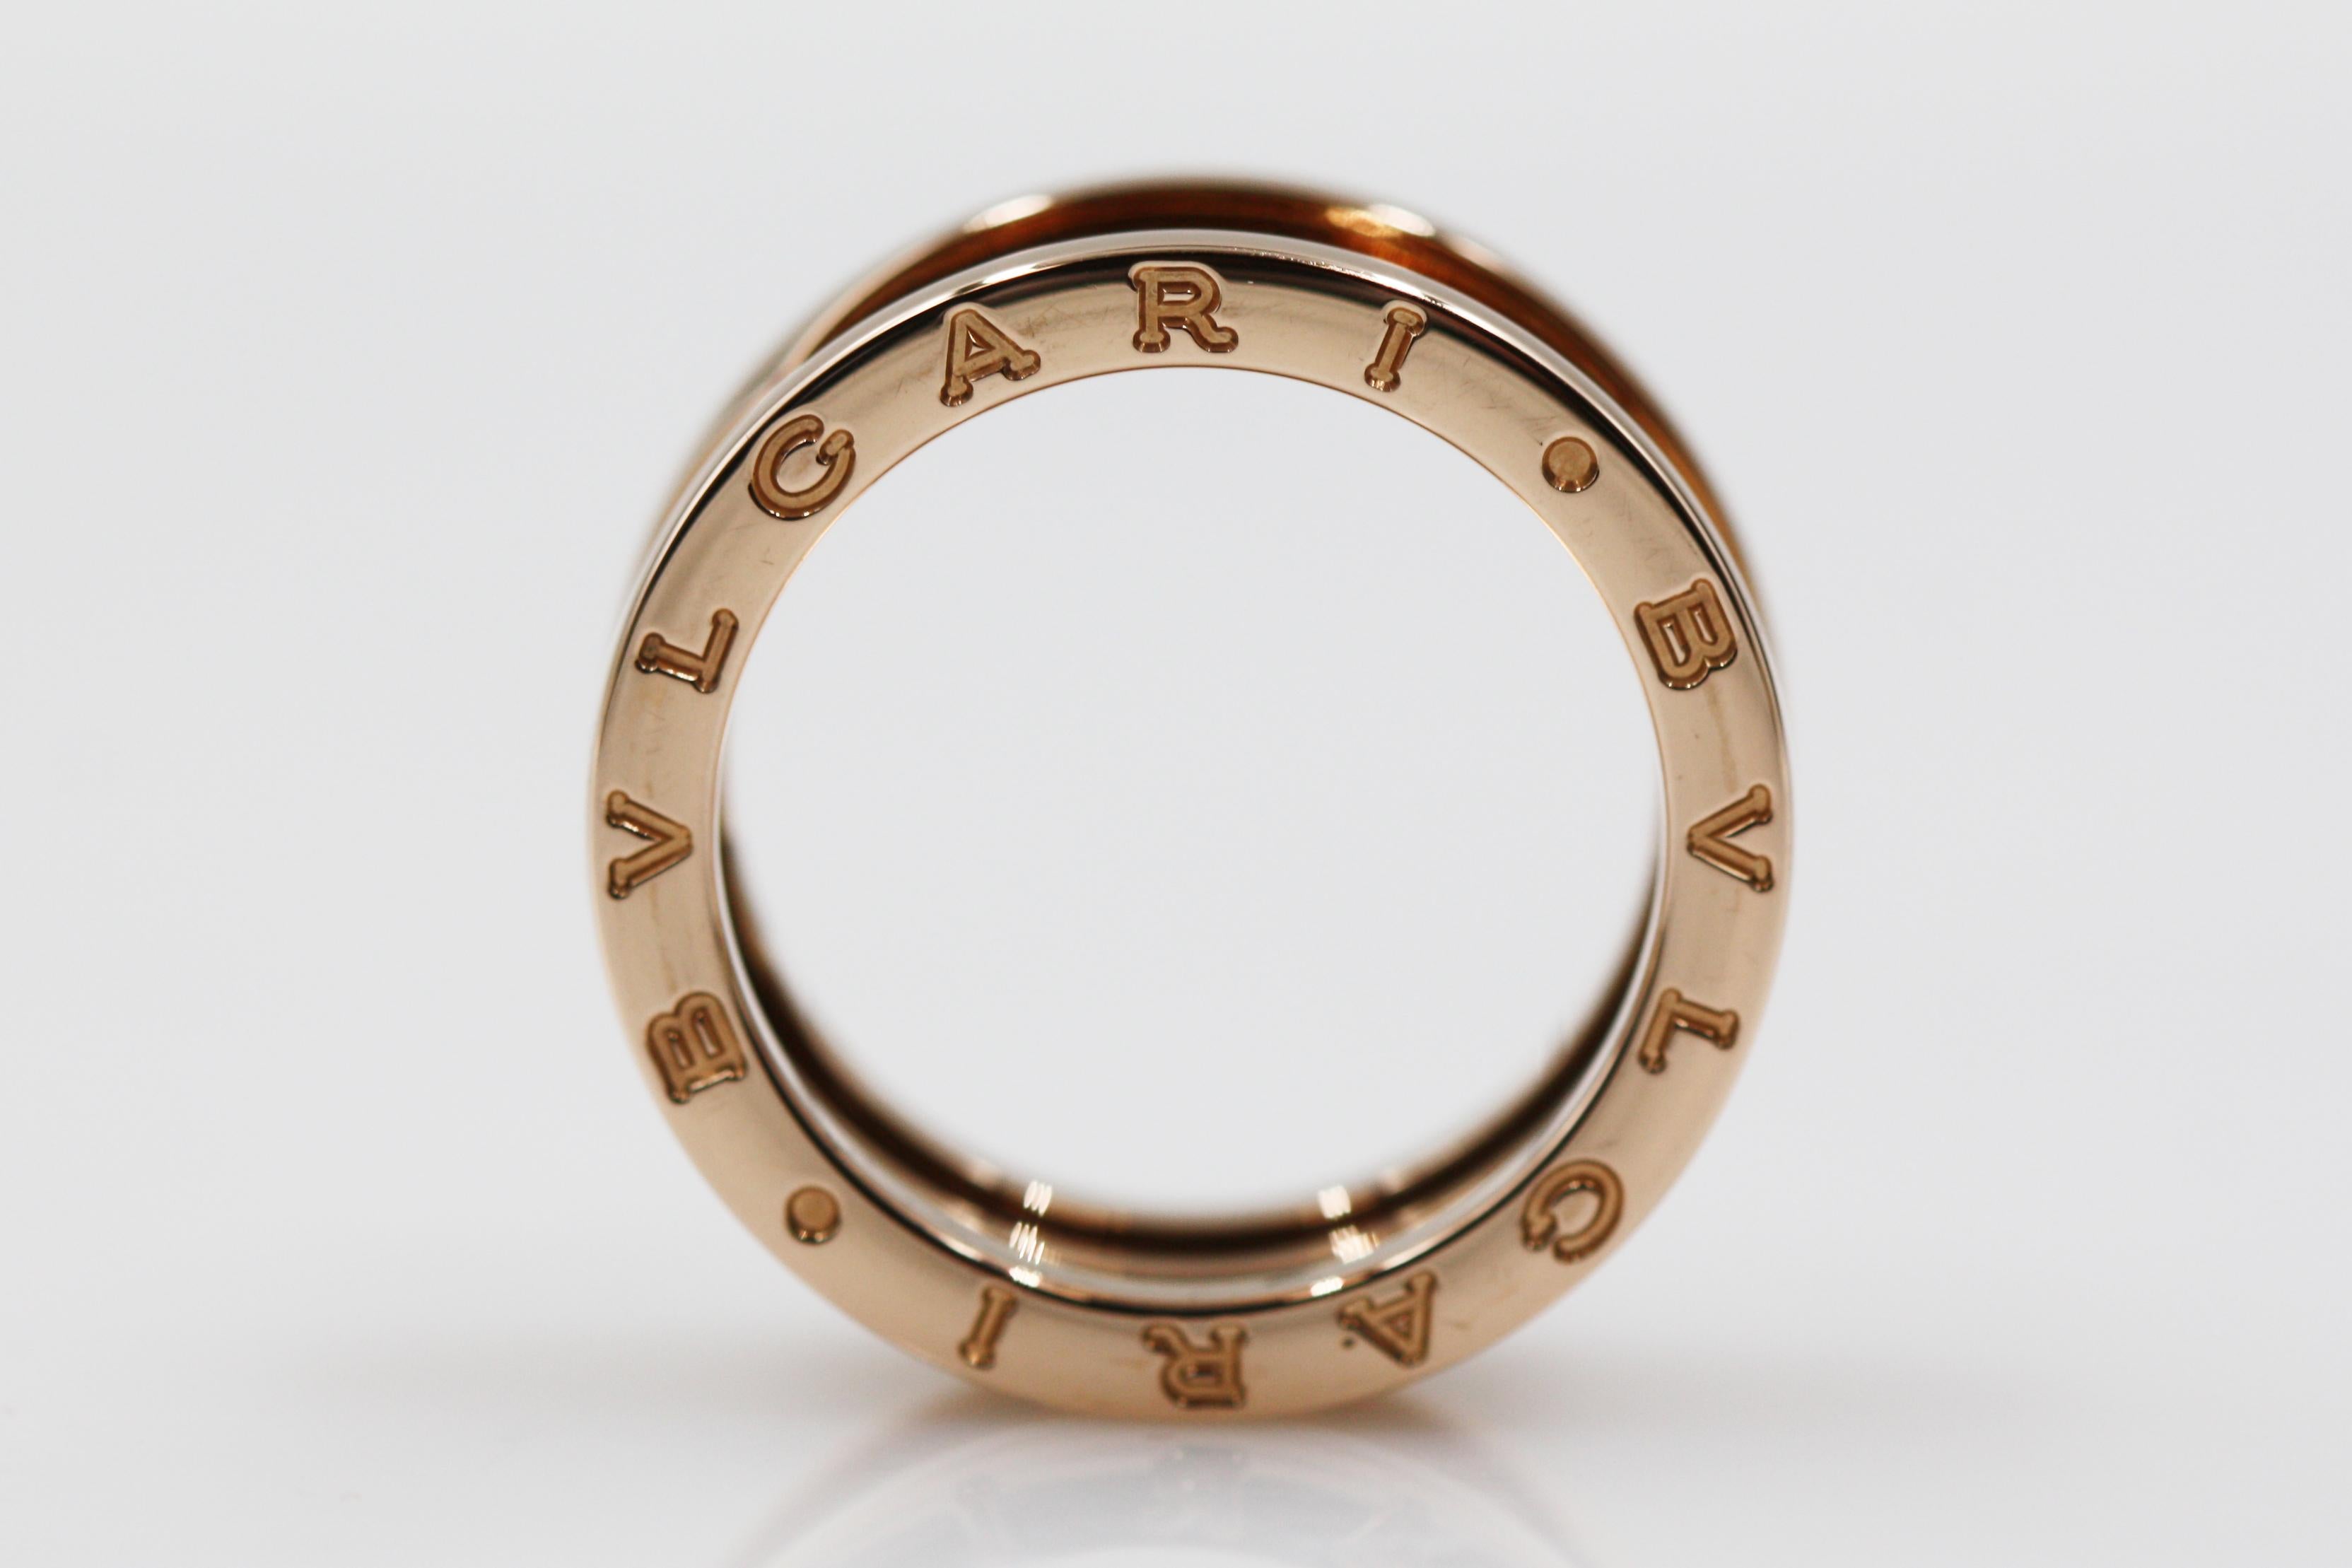 Bvlgari B.Zero 18K Rose Gold Ring 3 Band
Come with original box and paper.
Weight: approximately 10.6g
Size EU57 US8.25
Stock#: BLG444
Re: AN85204